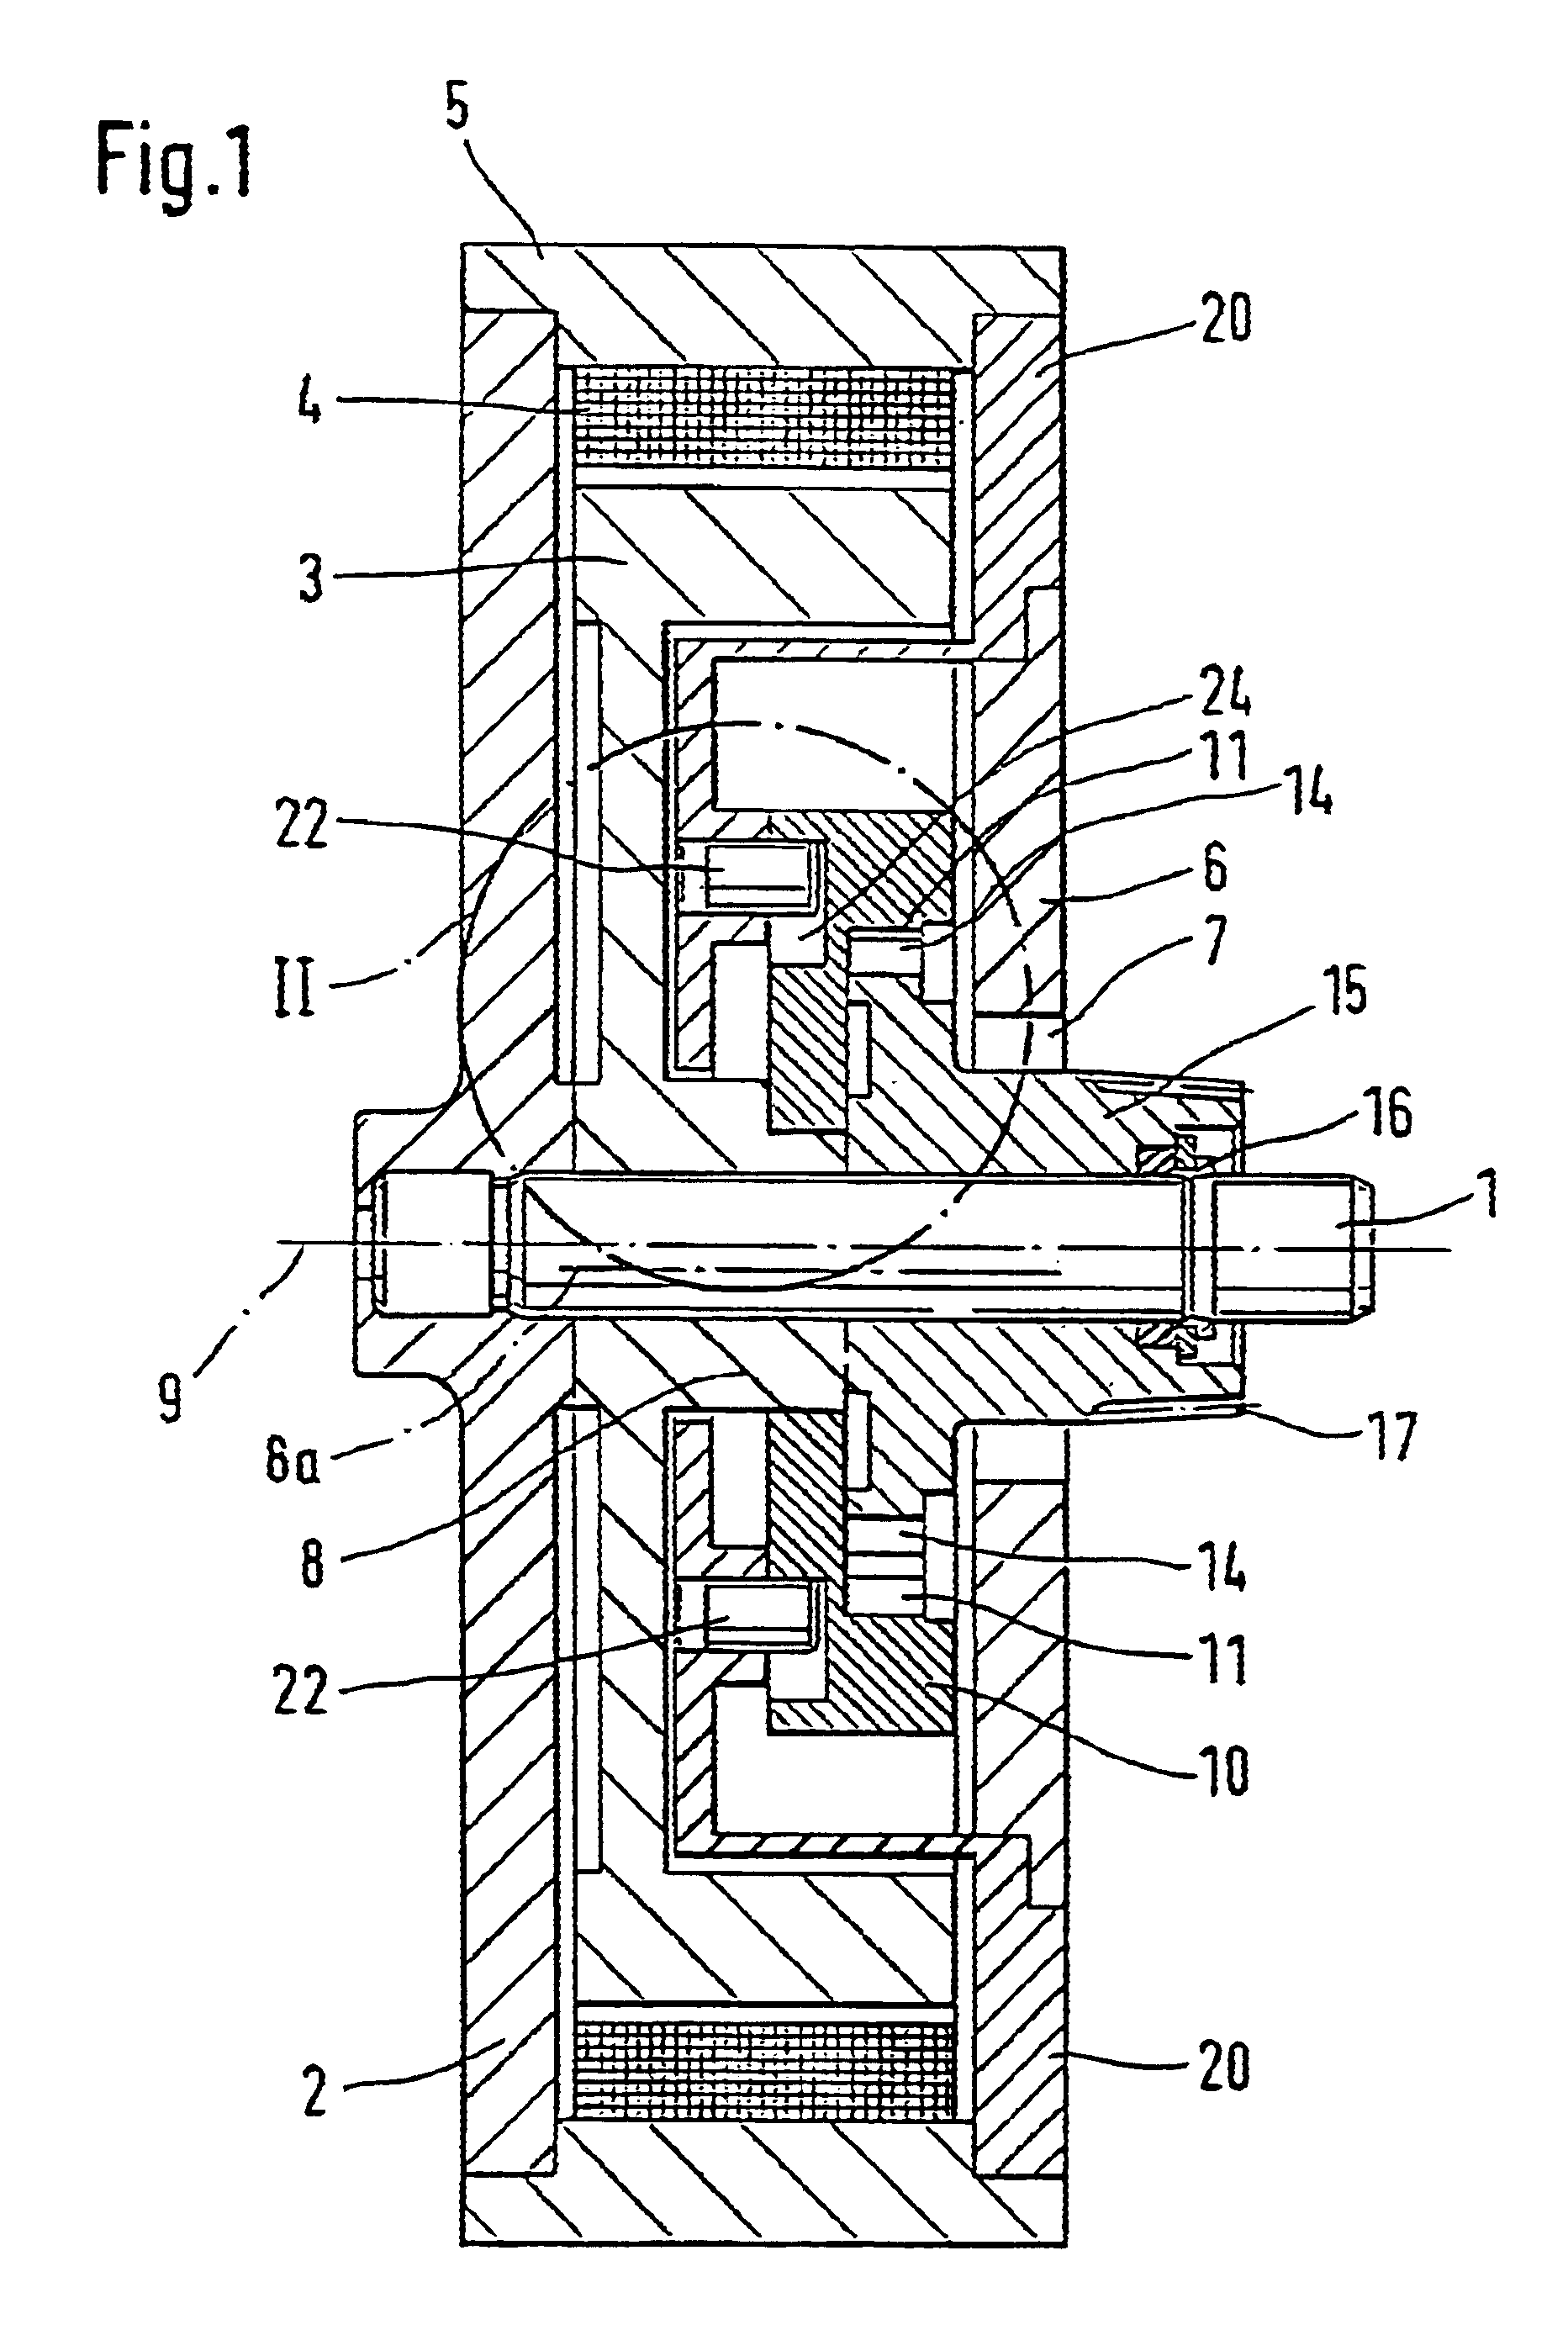 Motor-gear unit with integrated eccentric wheel gear